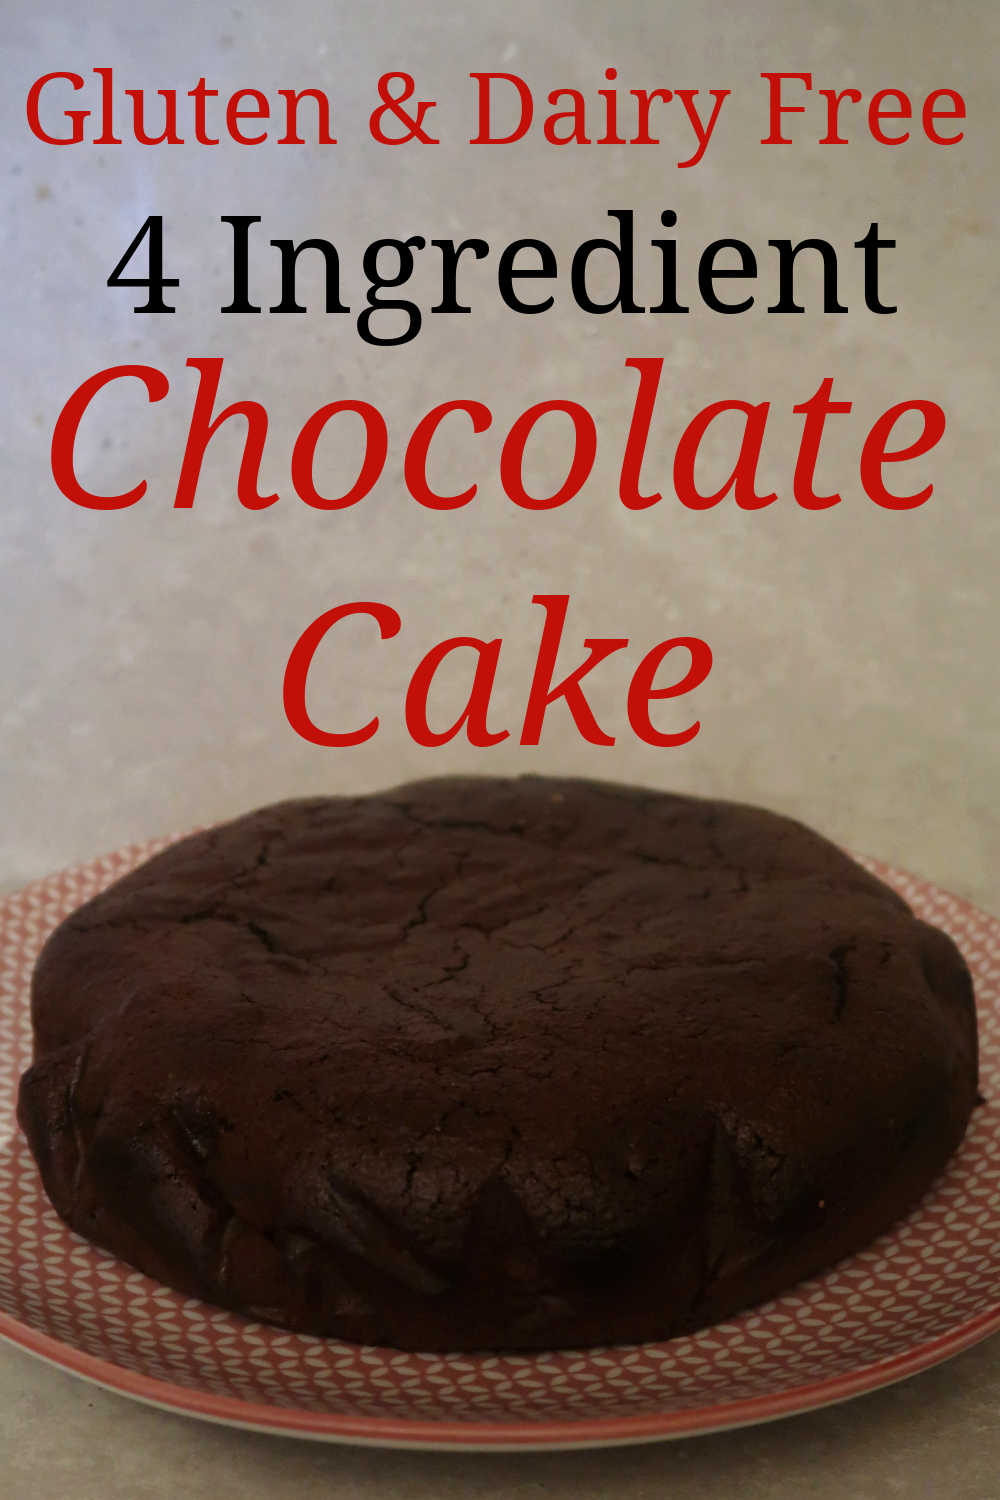 Gluten and Dairy Free Chocolate Cake Recipe - how to make the best, easy moist flourless 4 ingredient dessert that's gluten-free, dairy-free and paleo friendly.